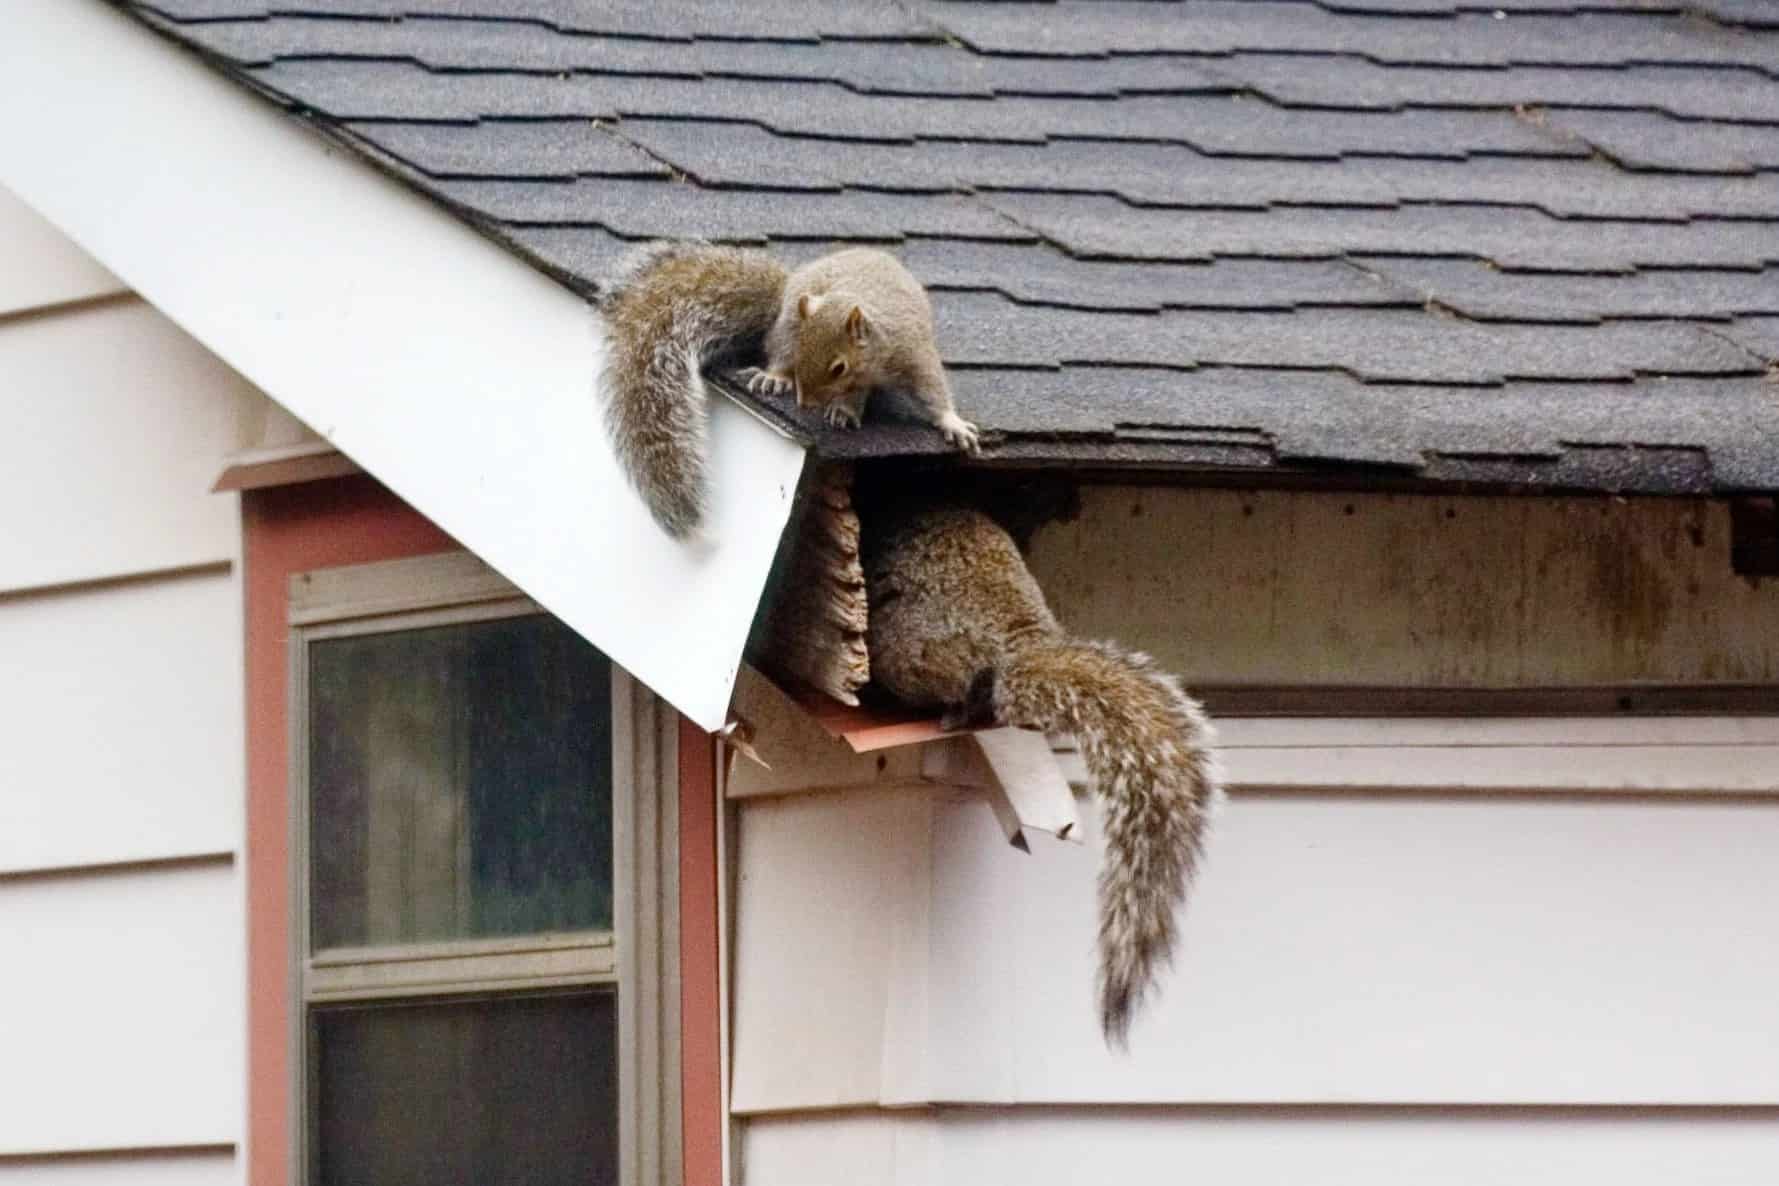  How to get rid of squirrels